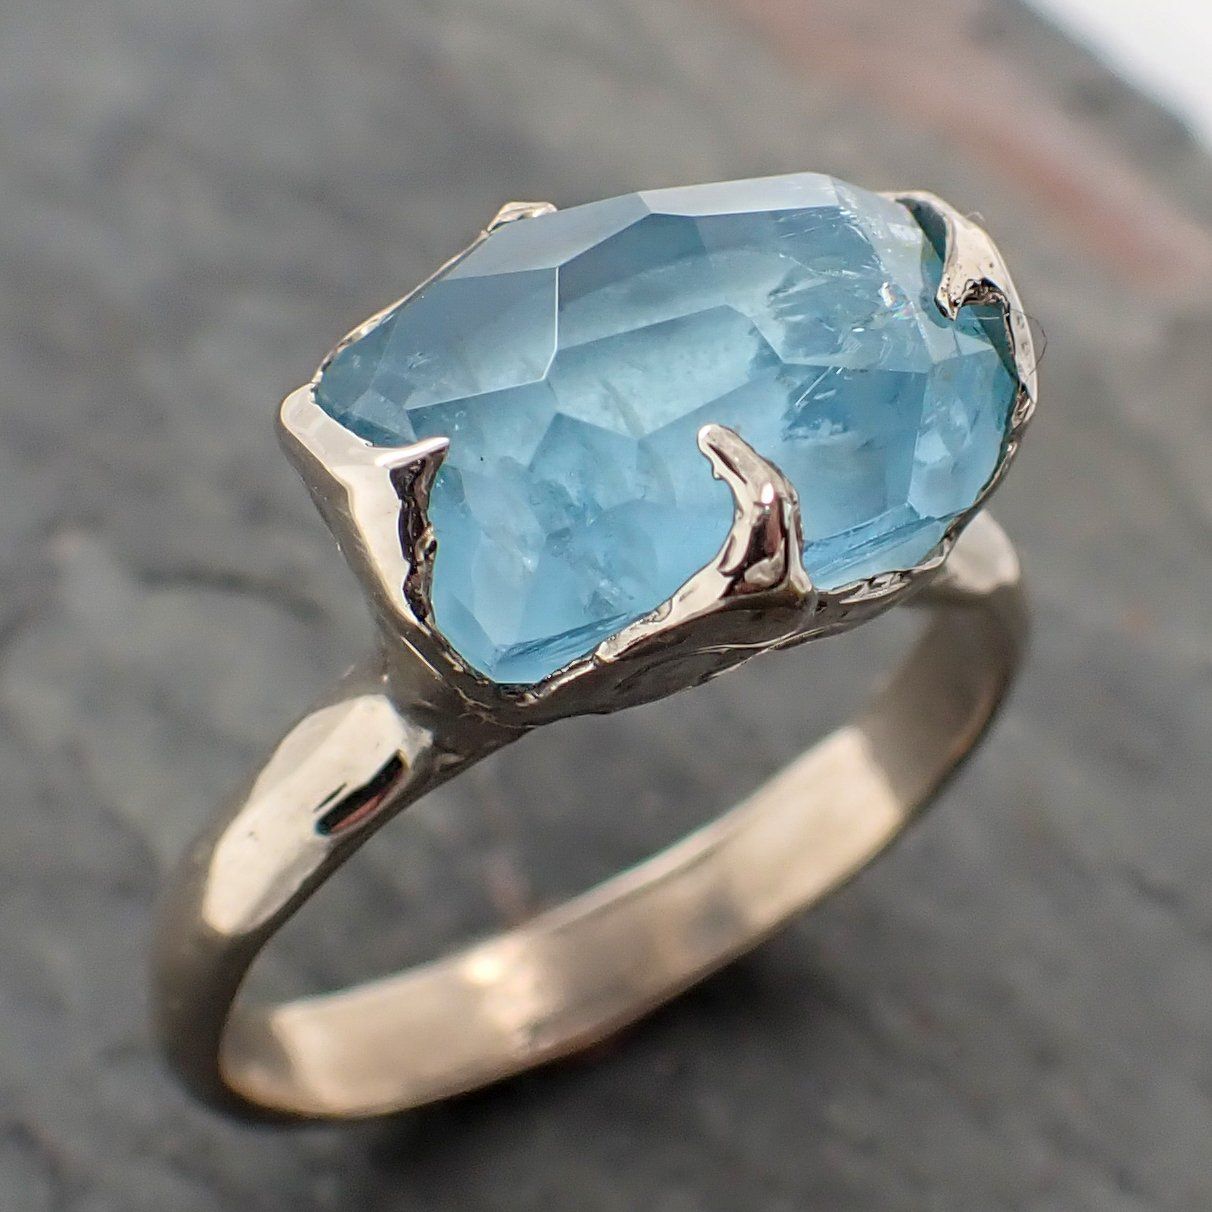 partially faceted aquamarine solitaire ring 14k white gold custom one of a kind gemstone ring bespoke byangeline 2272 Alternative Engagement